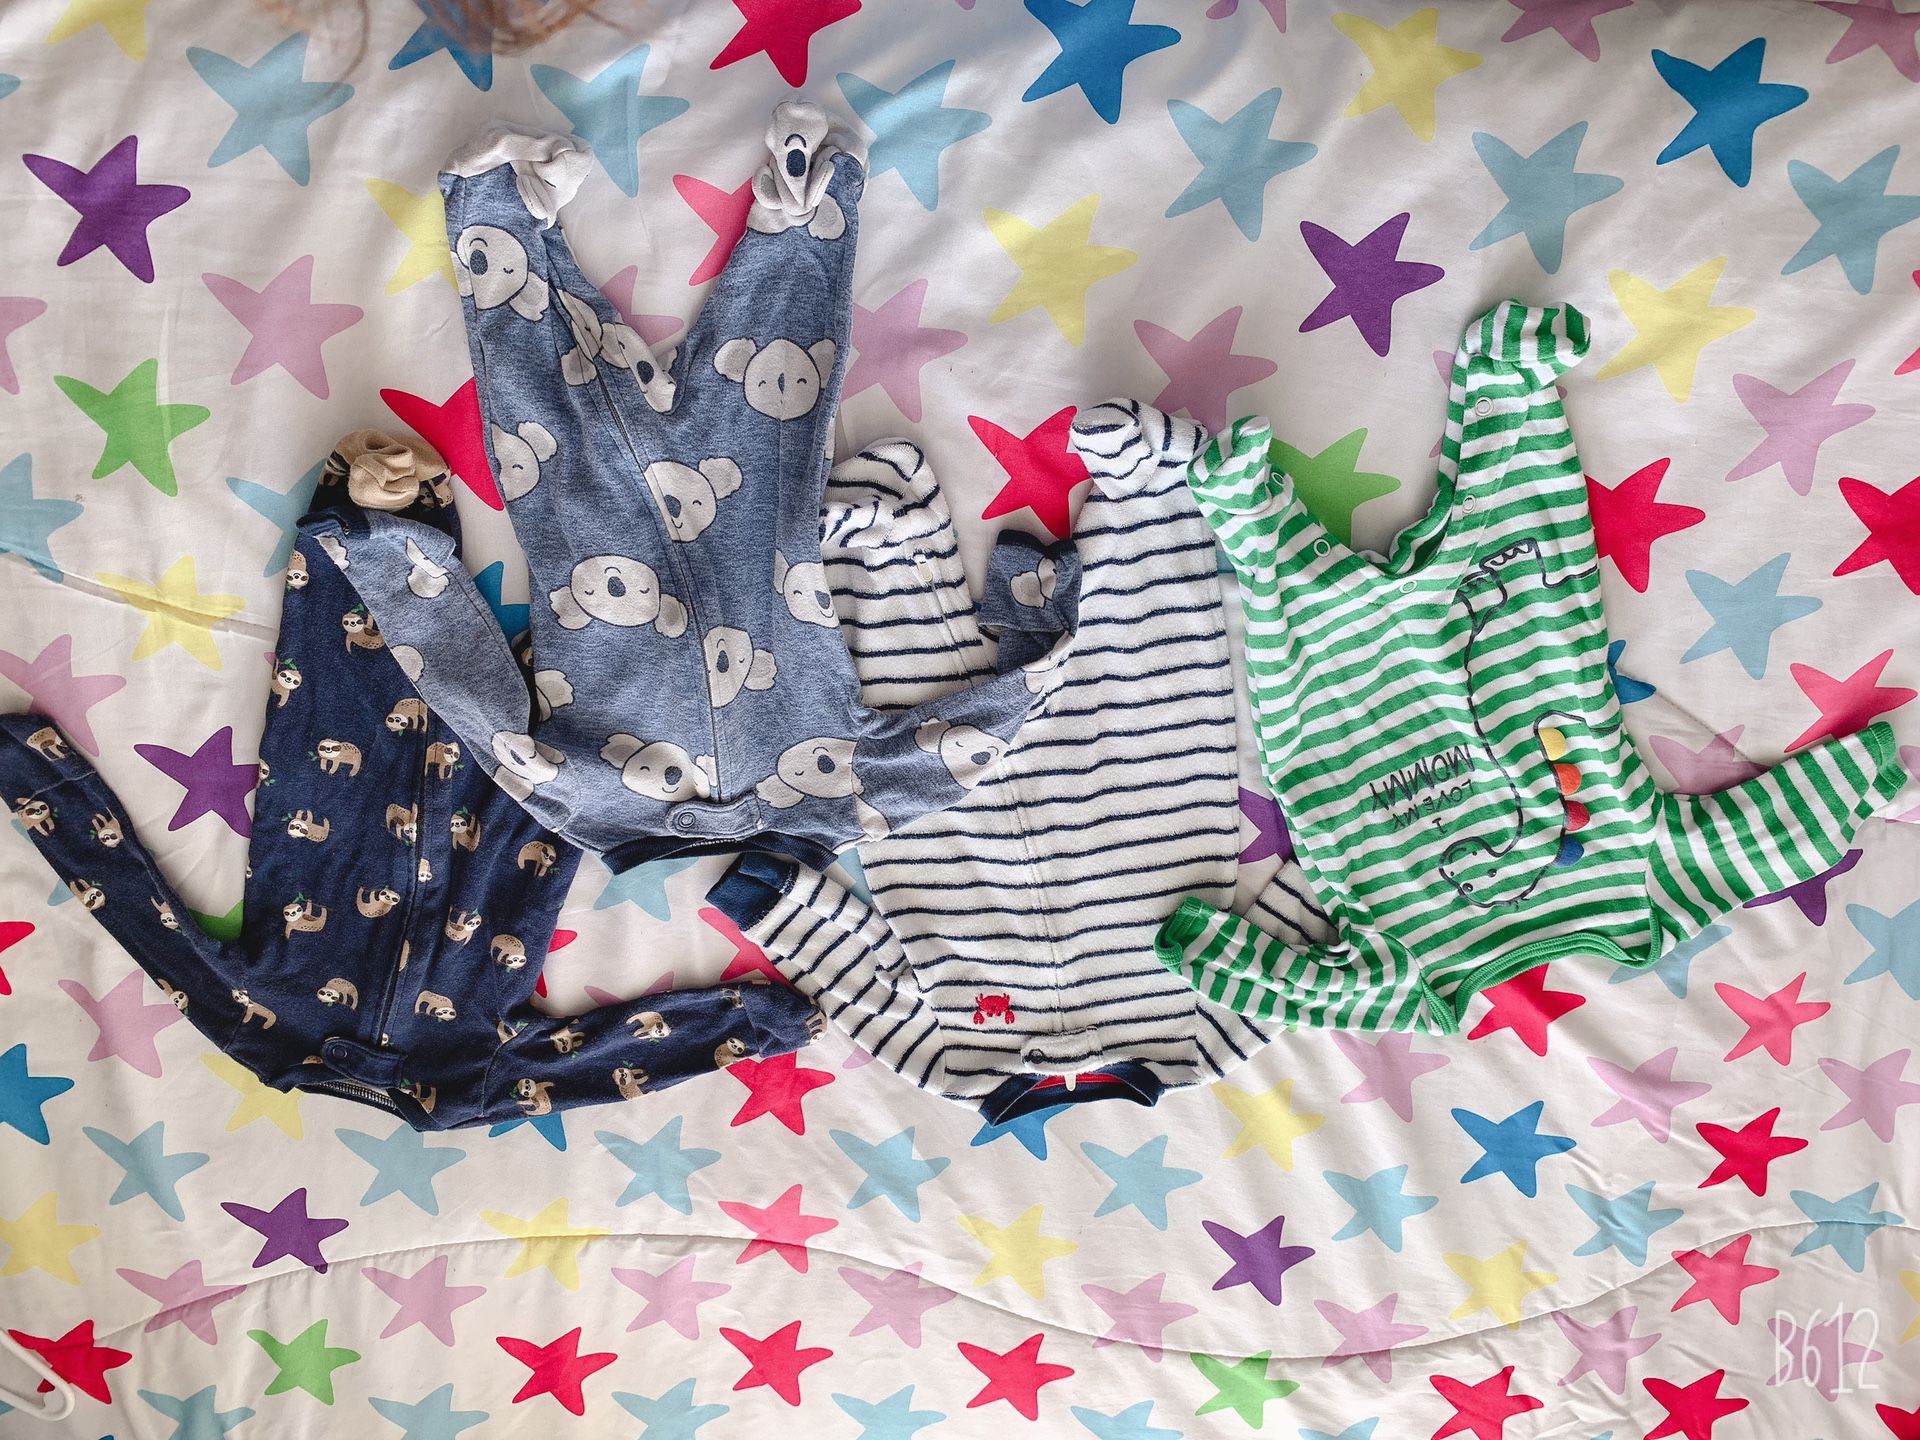 Baby’s clothes